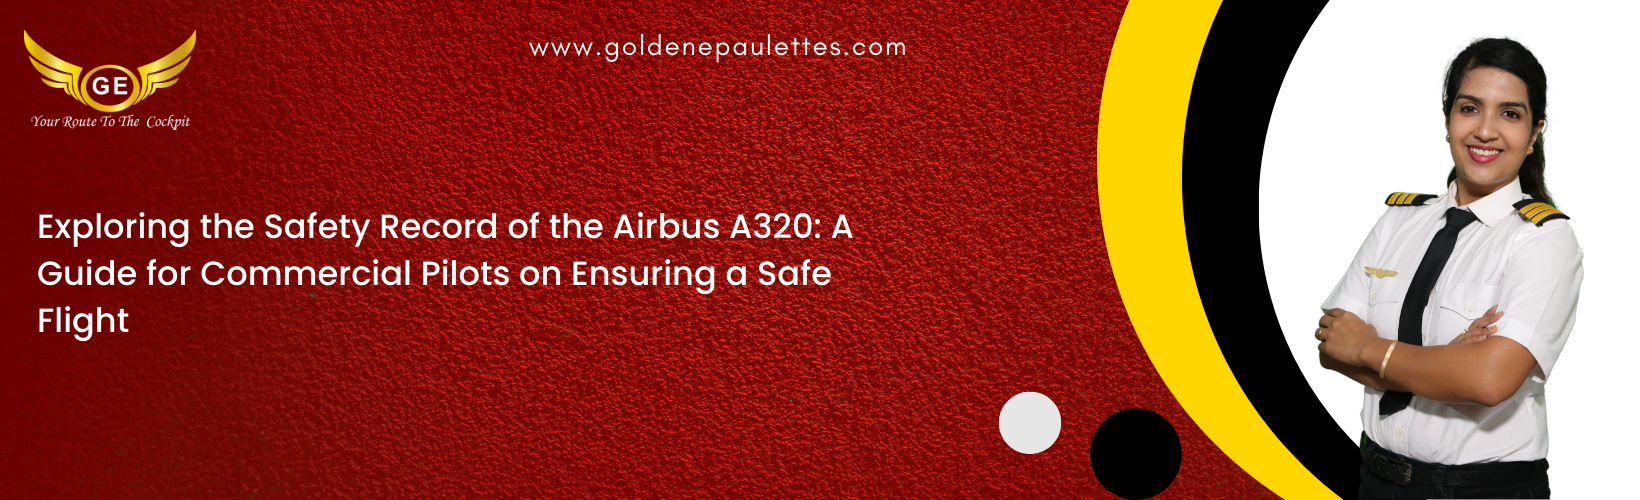 The Safety Record of the Airbus A320